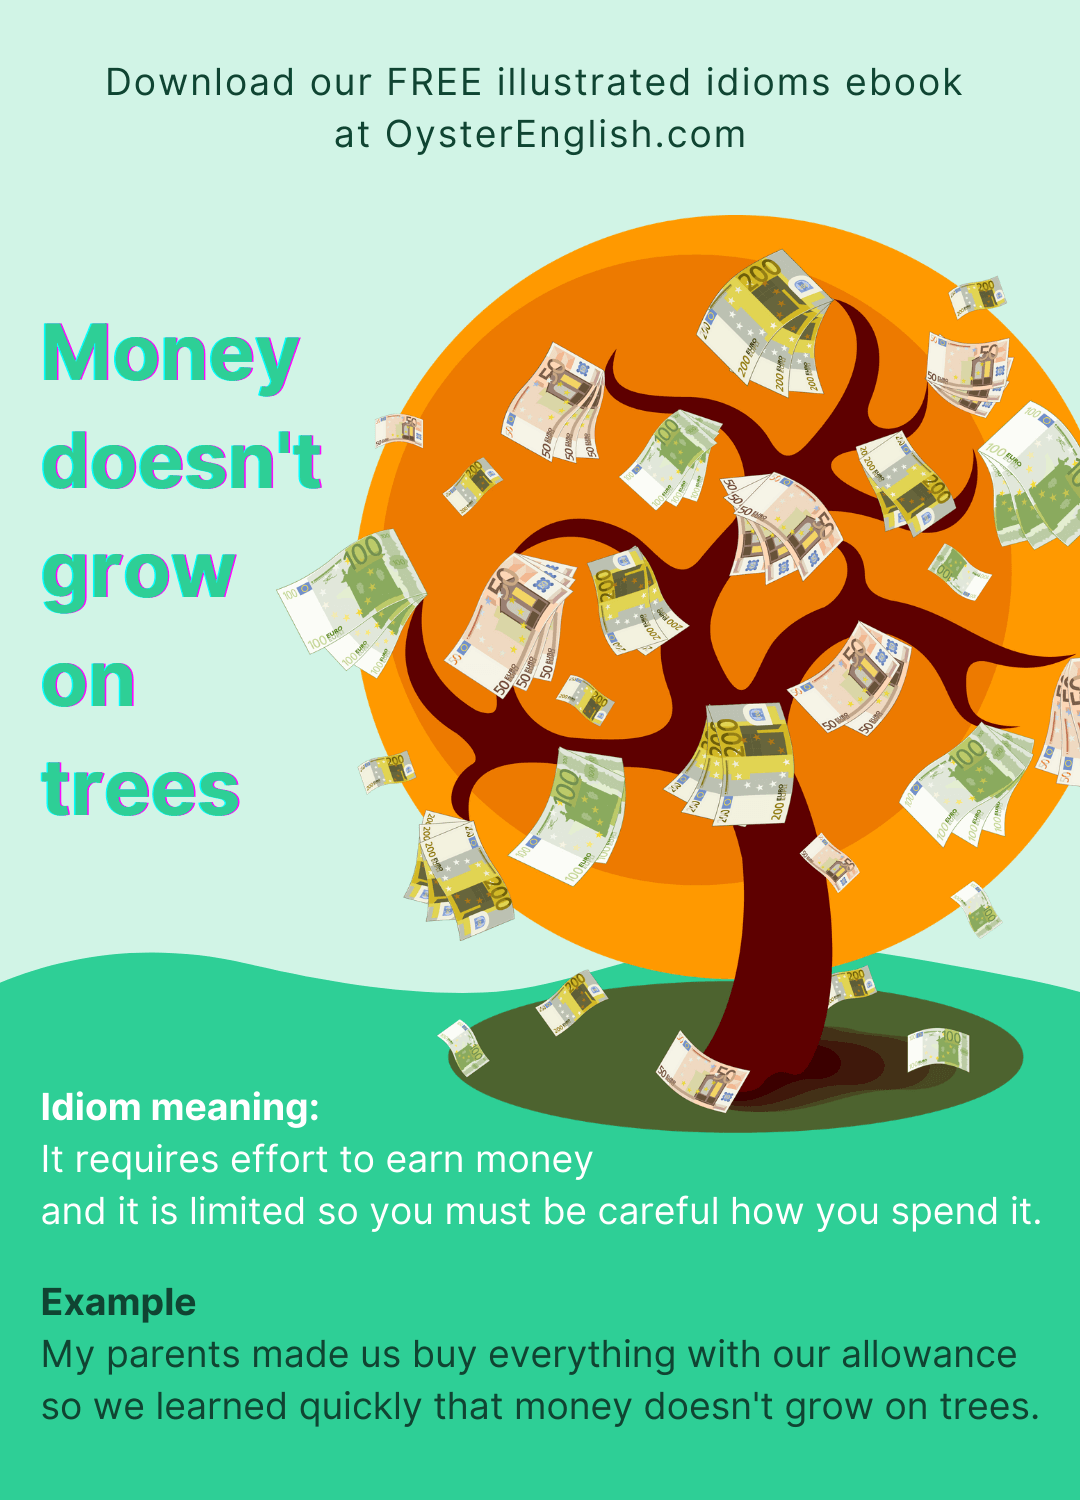 Image of a tree with euro bills attached to the branches. Caption: My parents made us buy everything with our allowance so we quickly learned that money doesn't grow on trees.